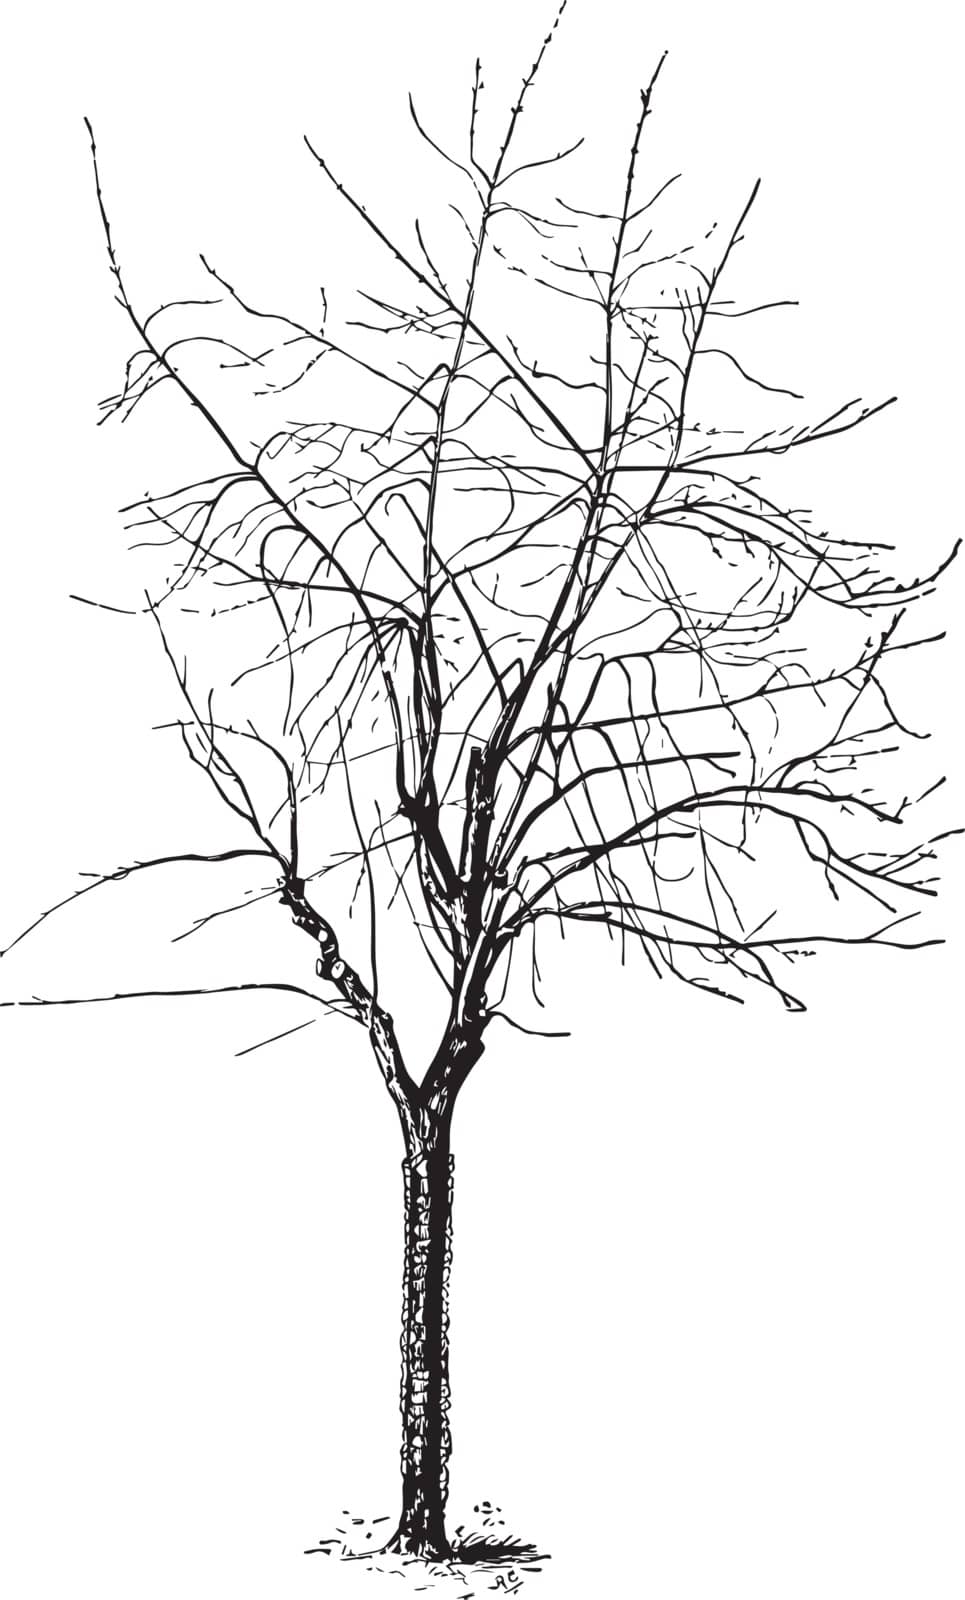 This illustration represents Silver maple after severe heading back, vintage line drawing or engraving illustration.